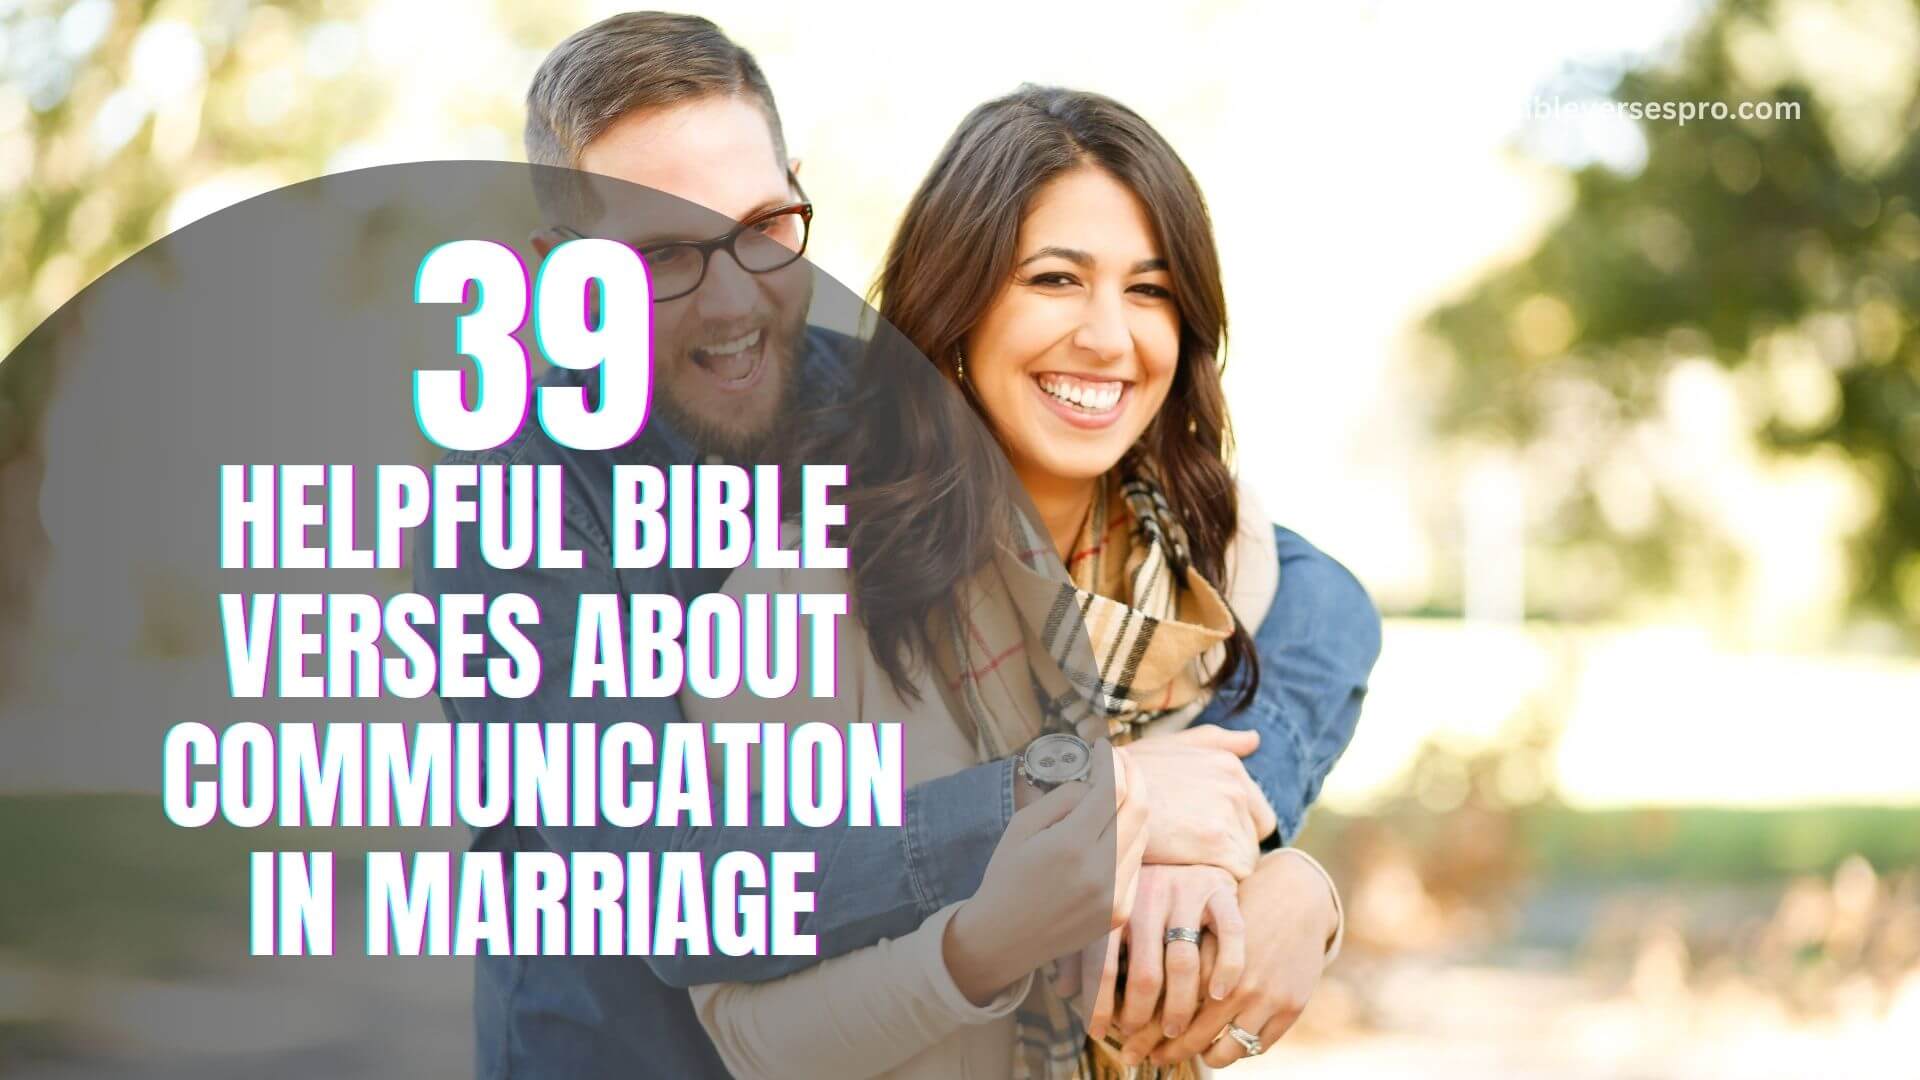 HELPFUL BIBLE VERSES ABOUT COMMUNICATION IN MARRIAGE (1)